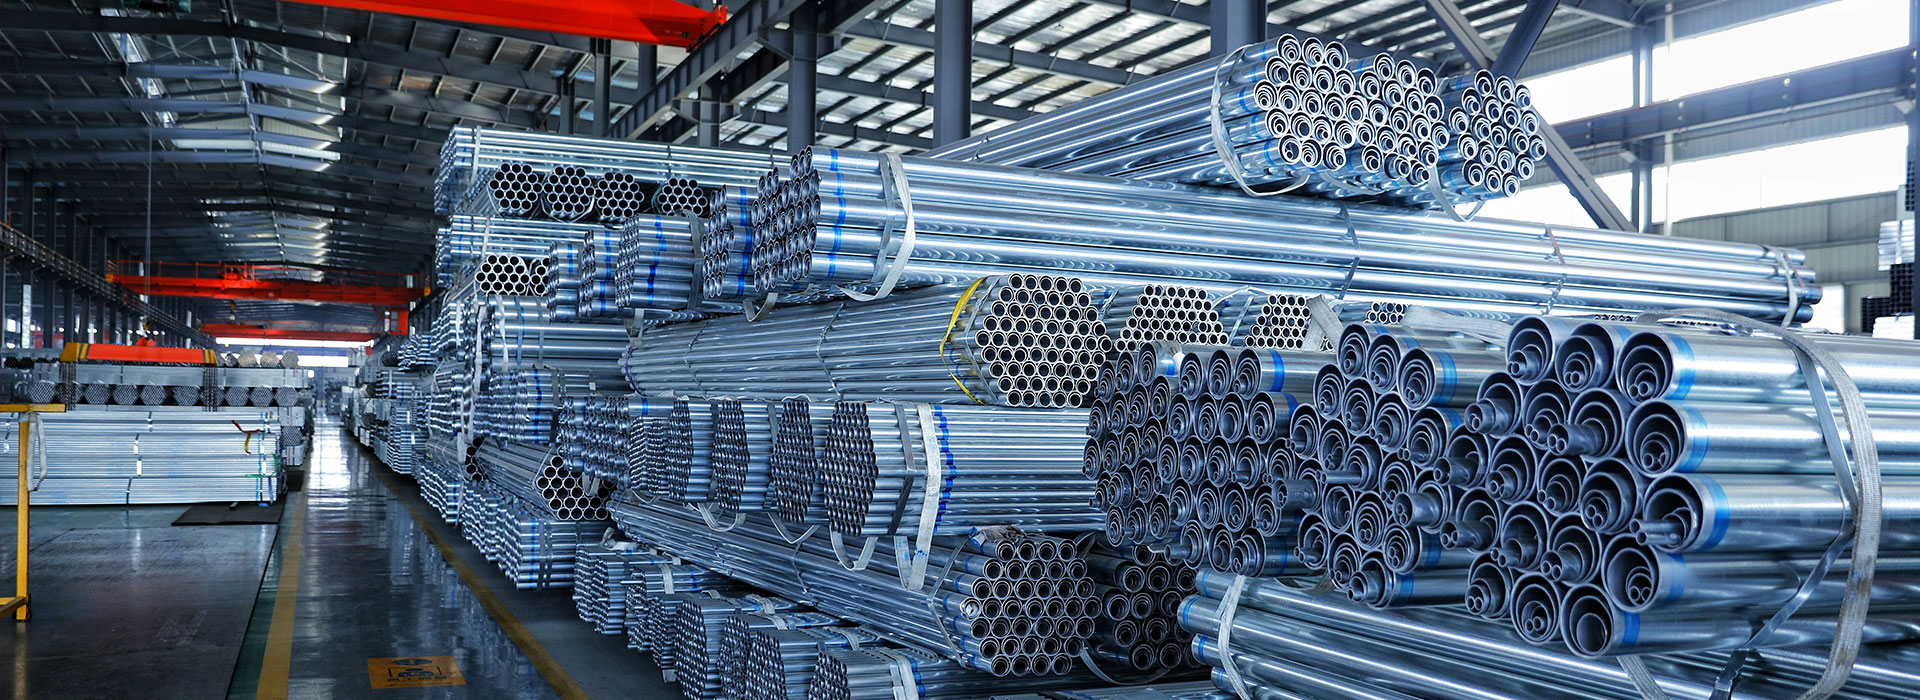 Cold Rolled Hollow Section Pre-Galvanized Steel Pipe Factory